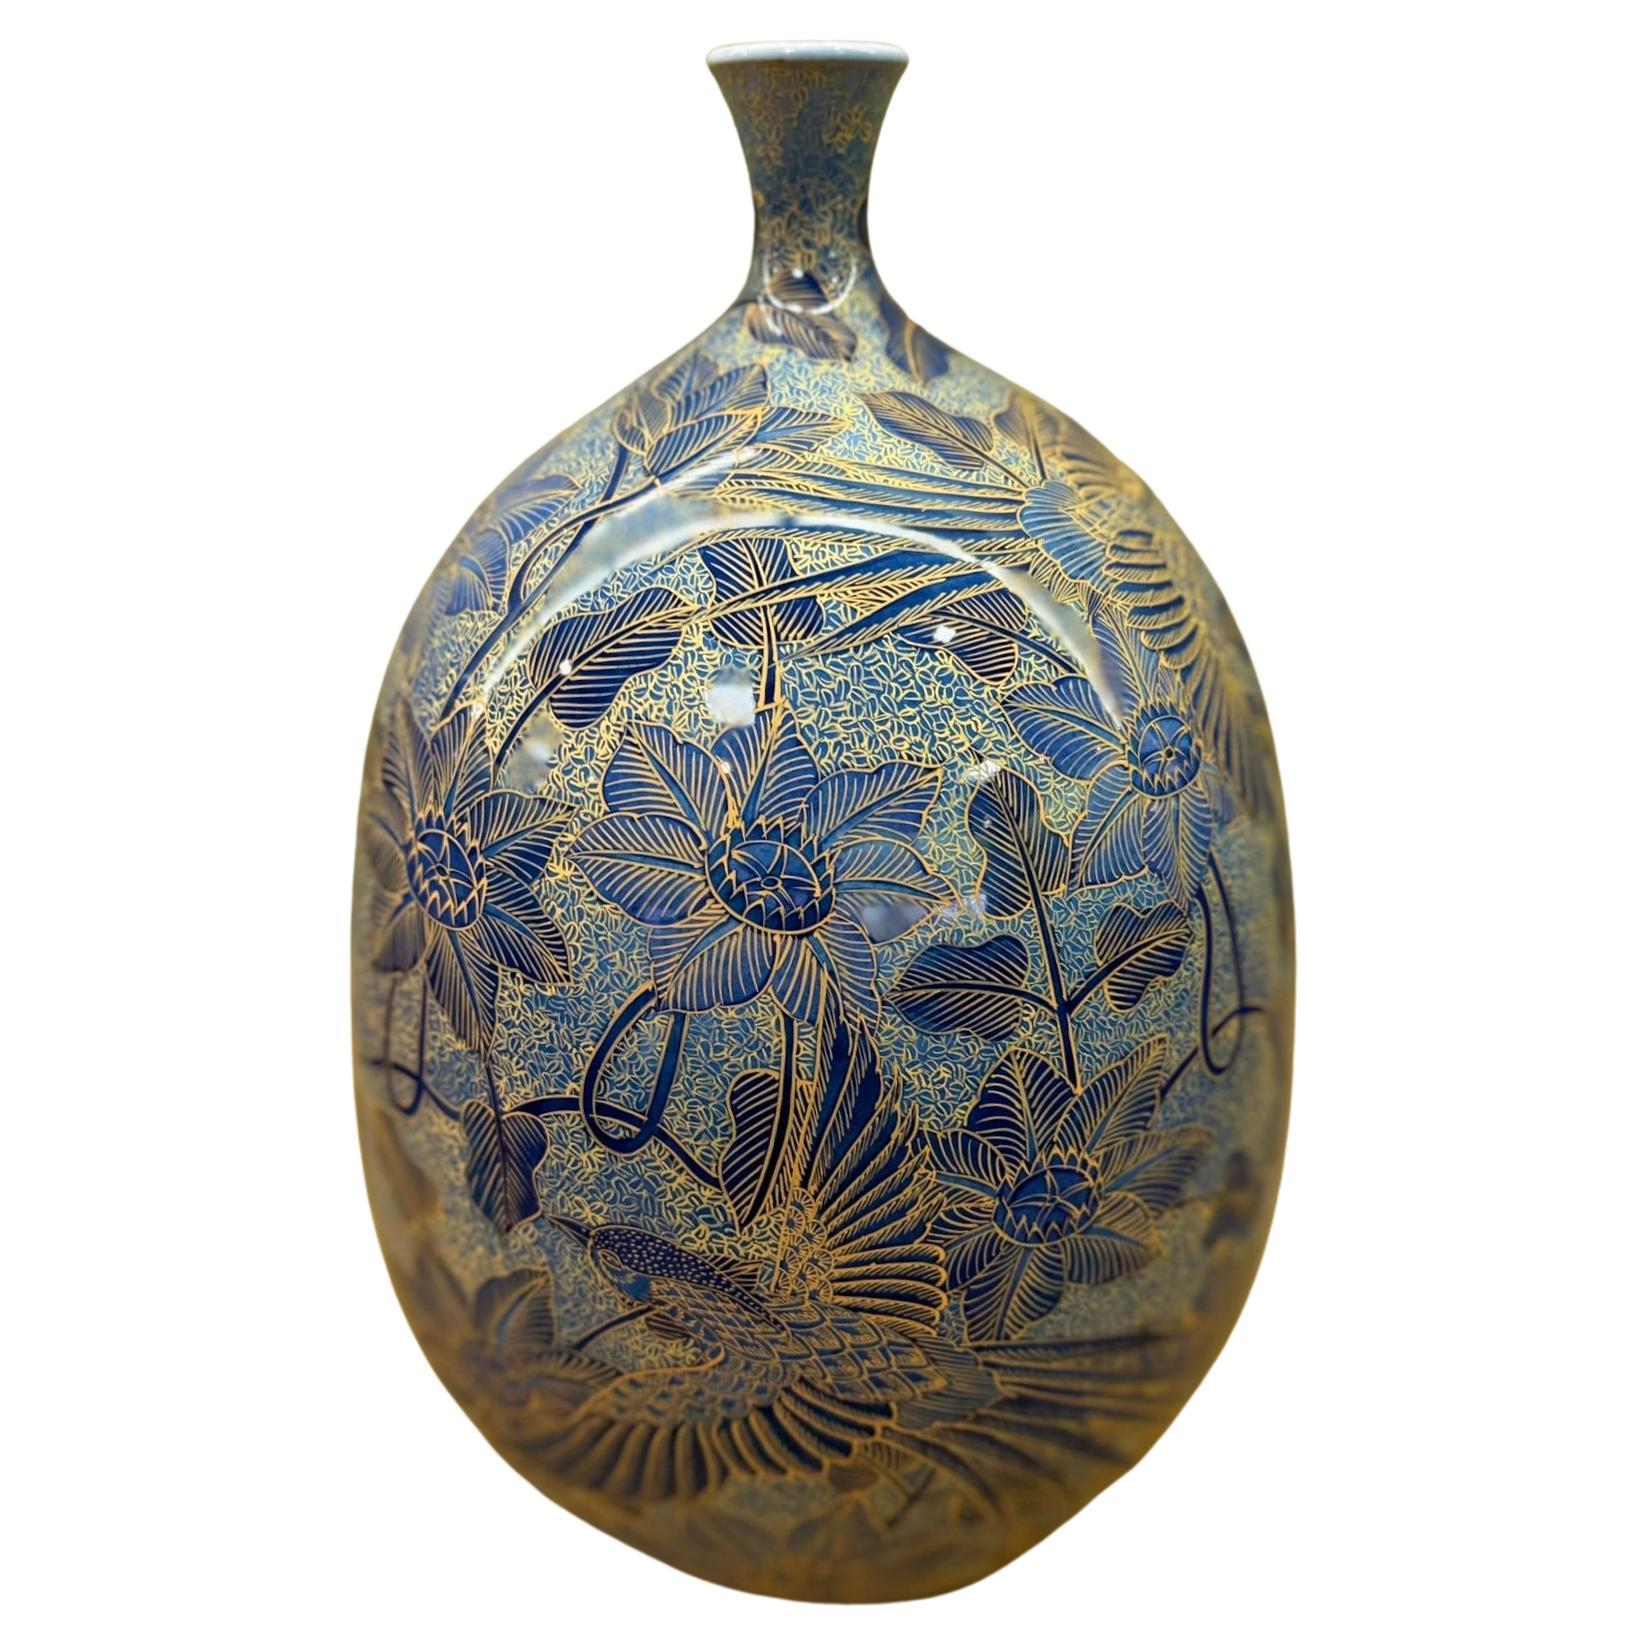 Extraordinary contemporary Japanese decorative porcelain vase, hand painted on a elegantly shaped porcelain body in blue, with extremely intricate patterns and extensive use of high purity gold, creating a mesmerizing palette with layers of